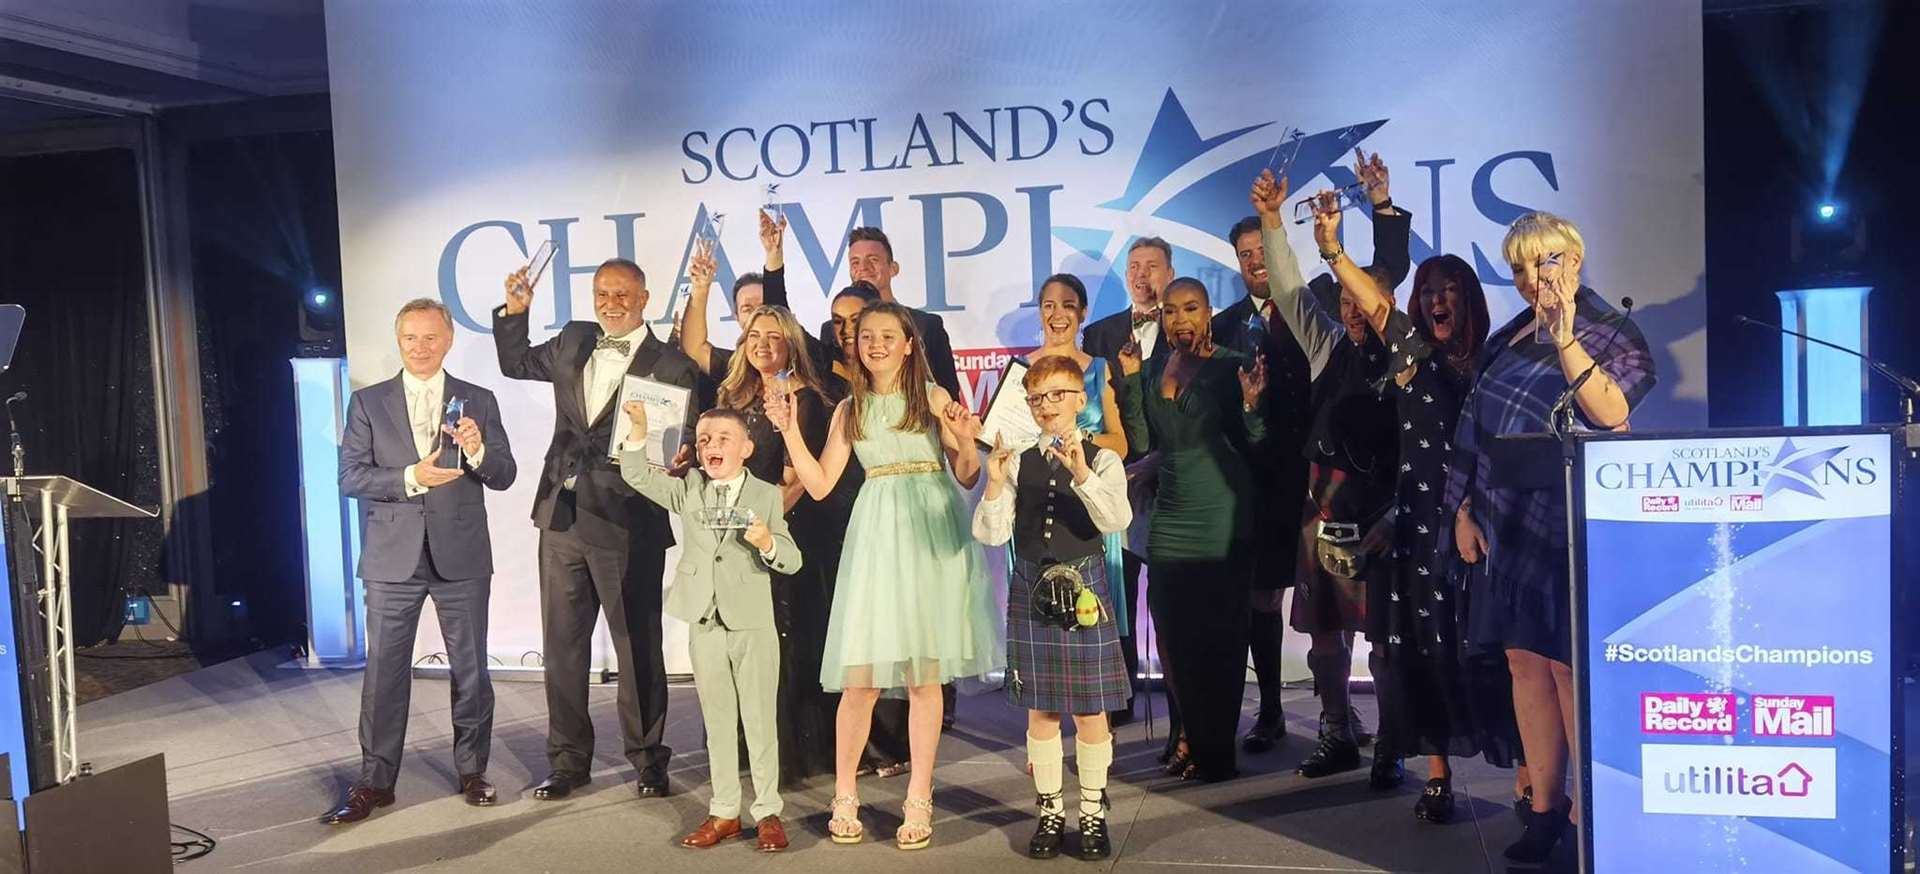 The award winners at the Scotland's Champions Awards ceremony.